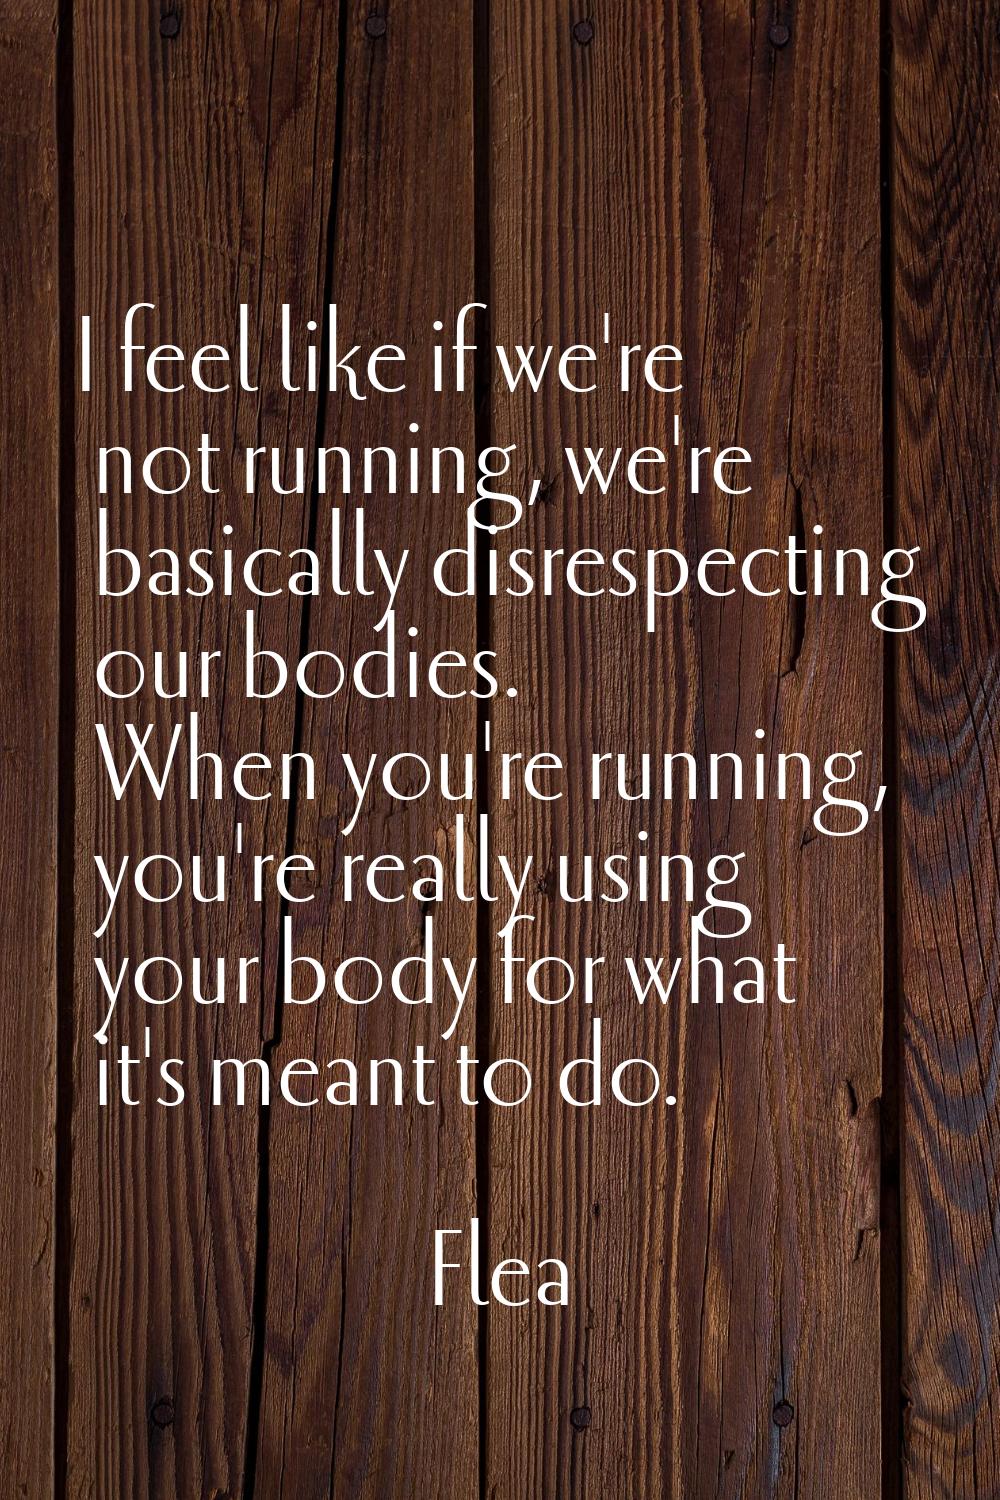 I feel like if we're not running, we're basically disrespecting our bodies. When you're running, yo